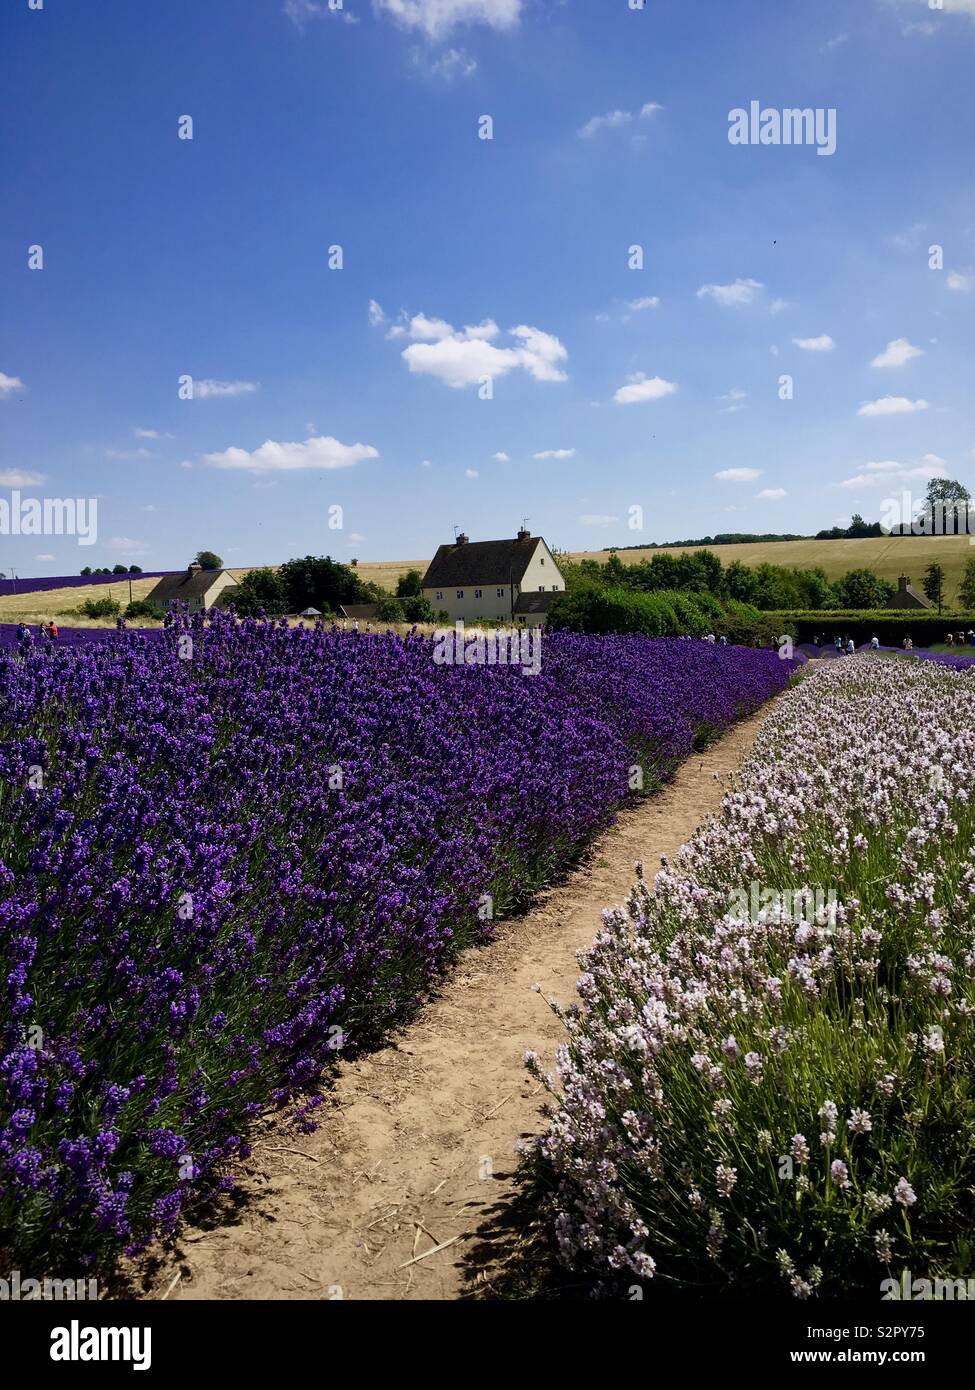 Lavender field in Snowshill, Broadway, Cotswold in full bloom with a heaven fragrance! Stock Photo